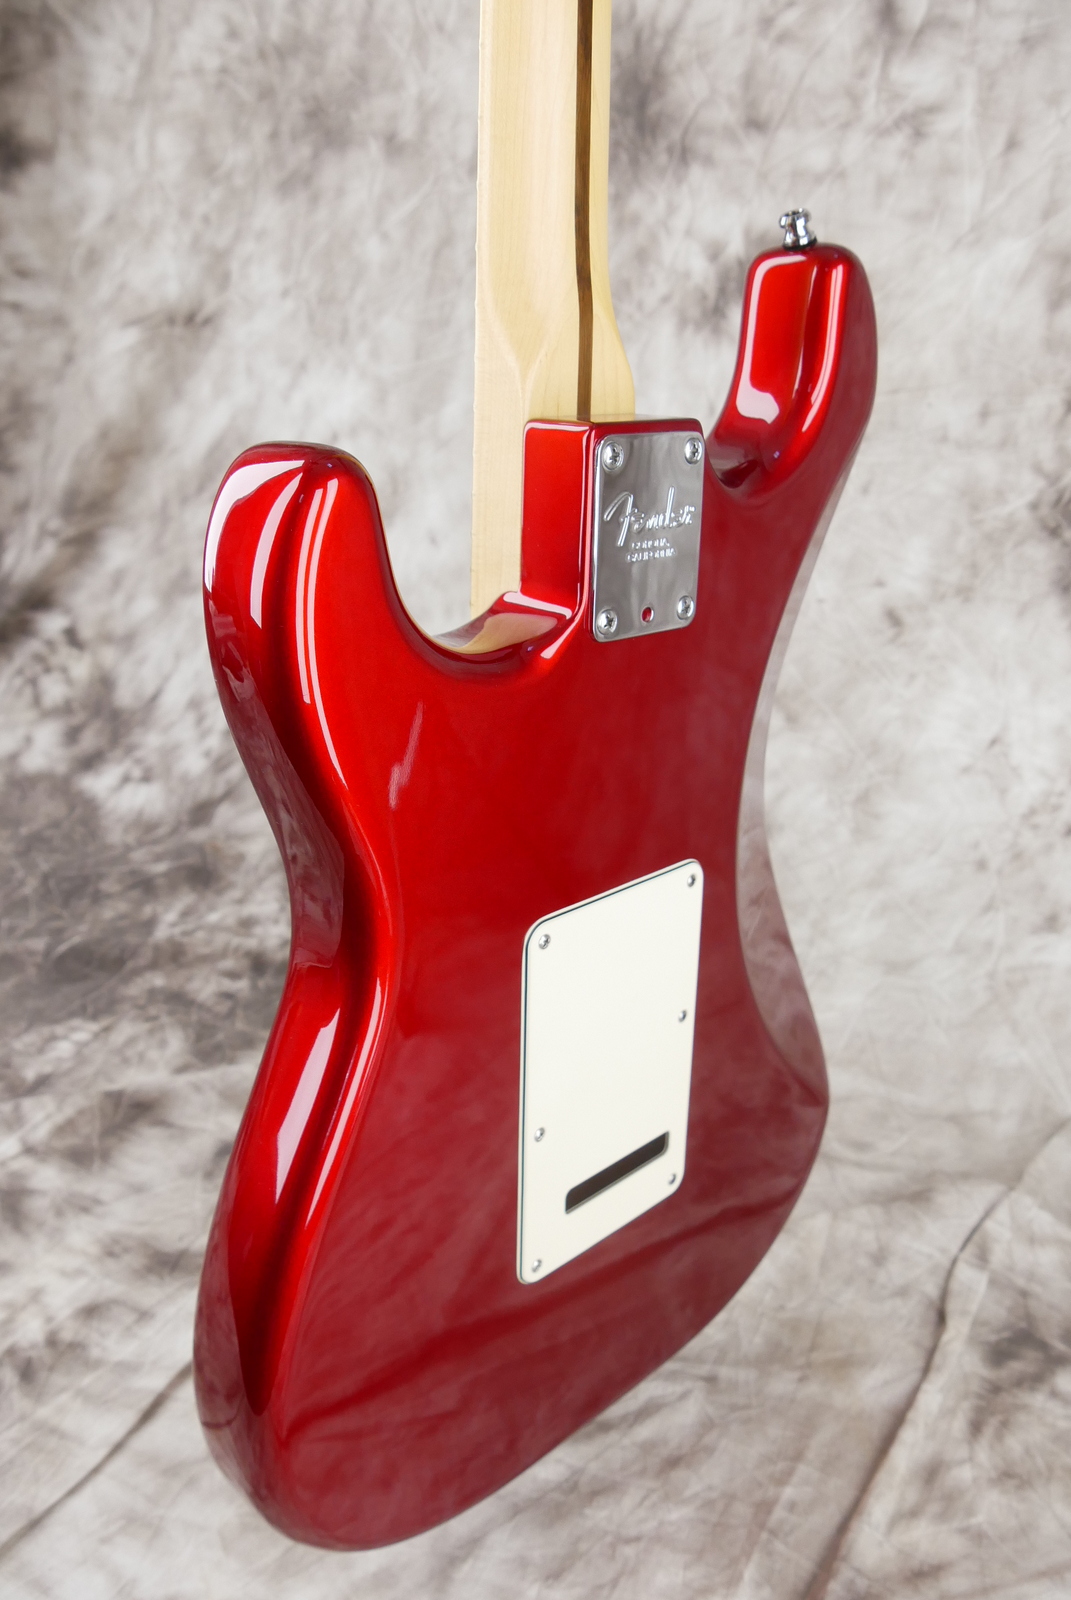 Fender_Stratocaster_USA_built_from_parts_candy_apple_red_2015-007.JPG